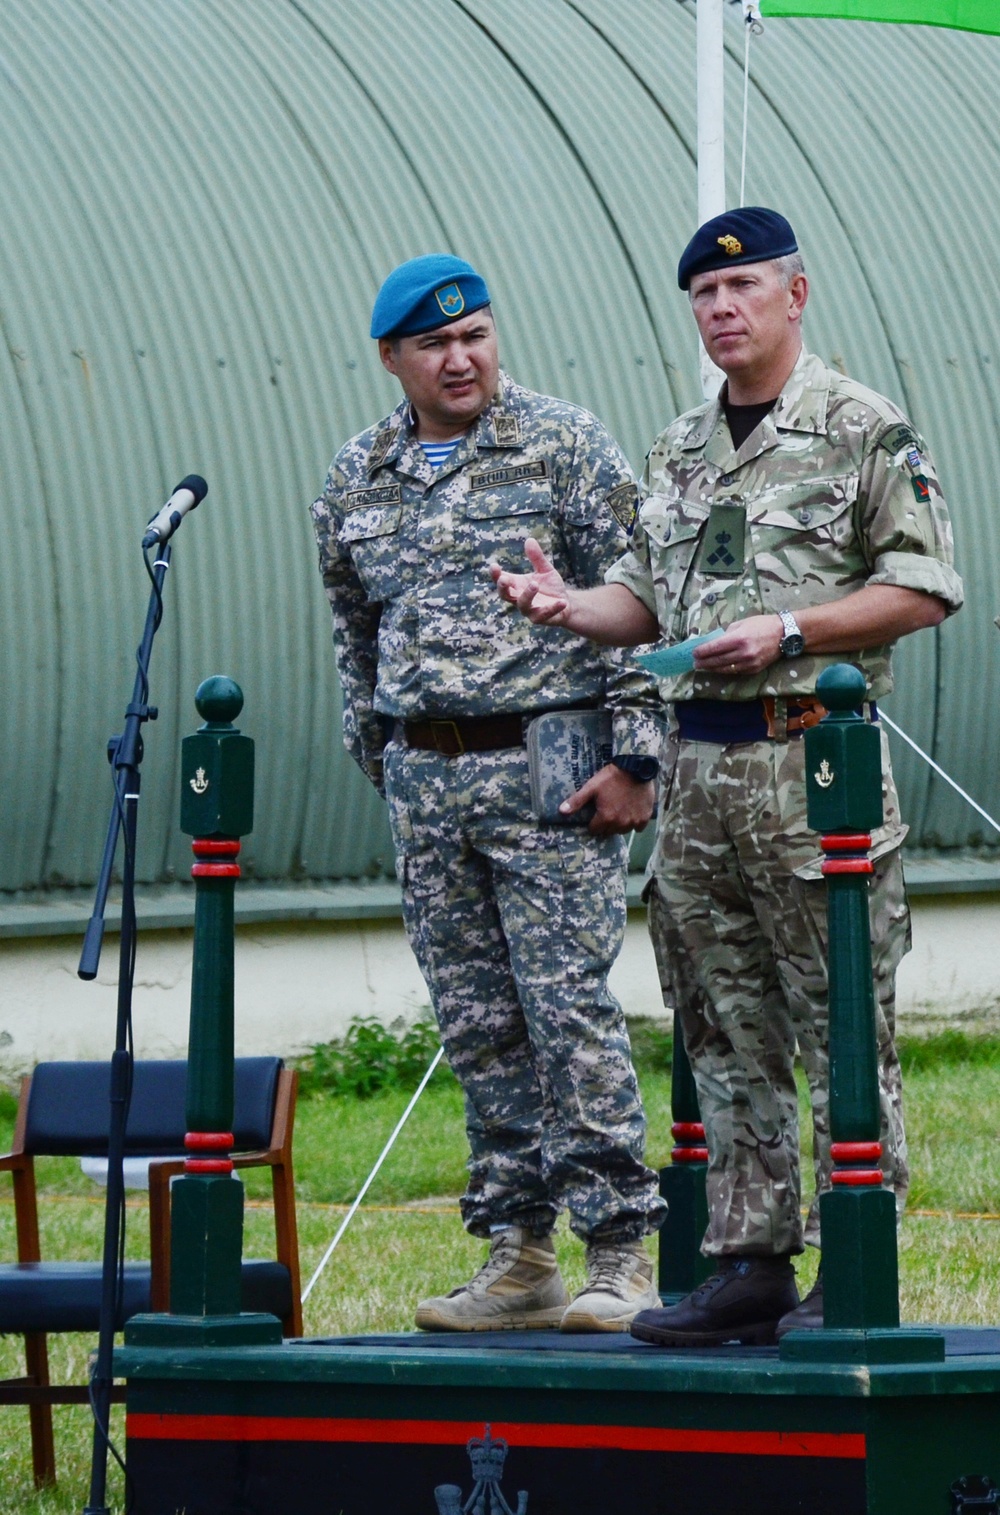 Steppe Eagle 16 opening ceremony held in U.K.